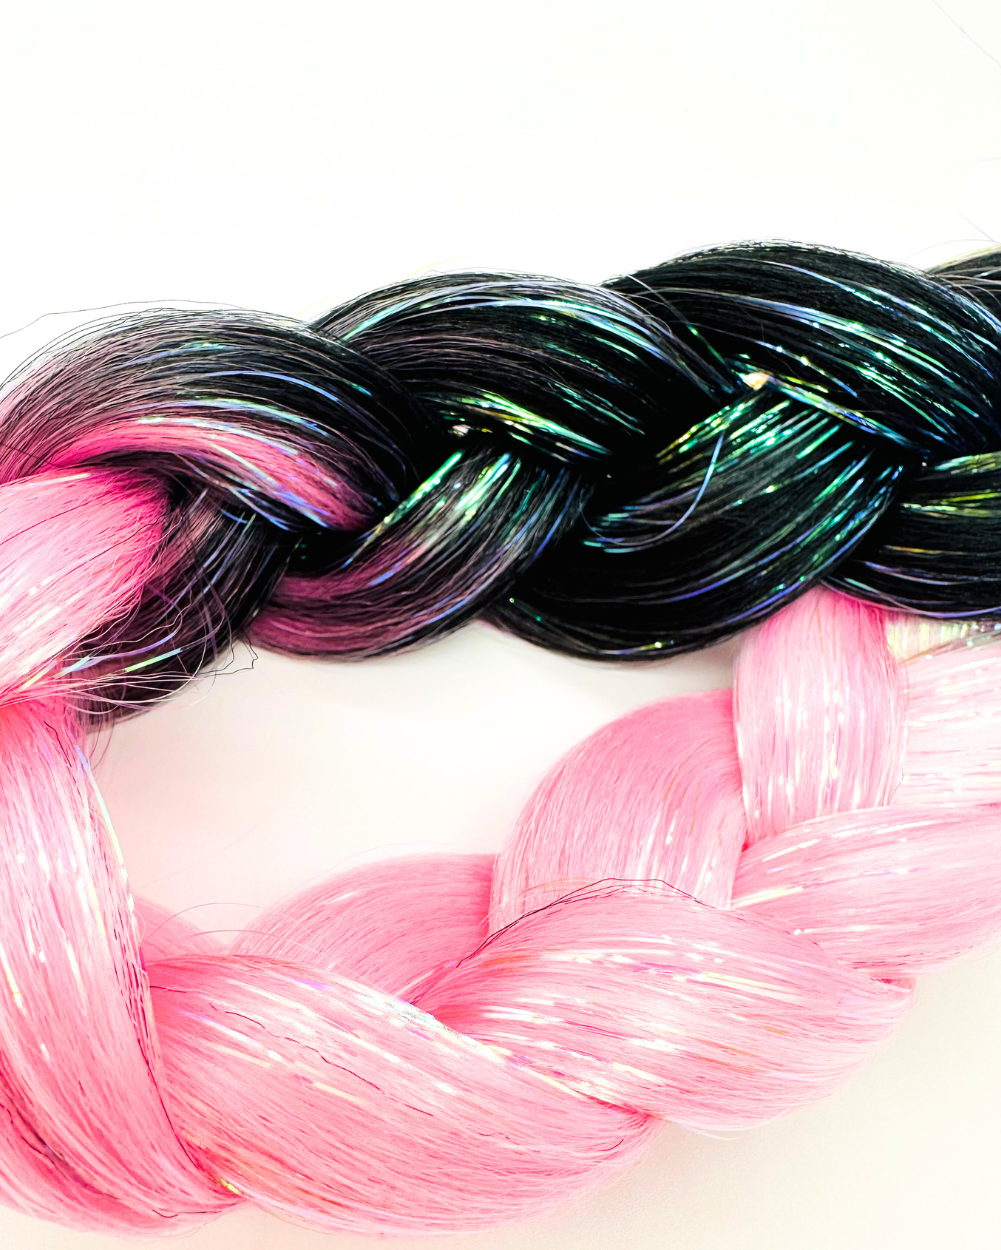 Candy Kiss - Black and Pink Ombré Hair Extension with Tinsel - Lunautics Braid-In Hair